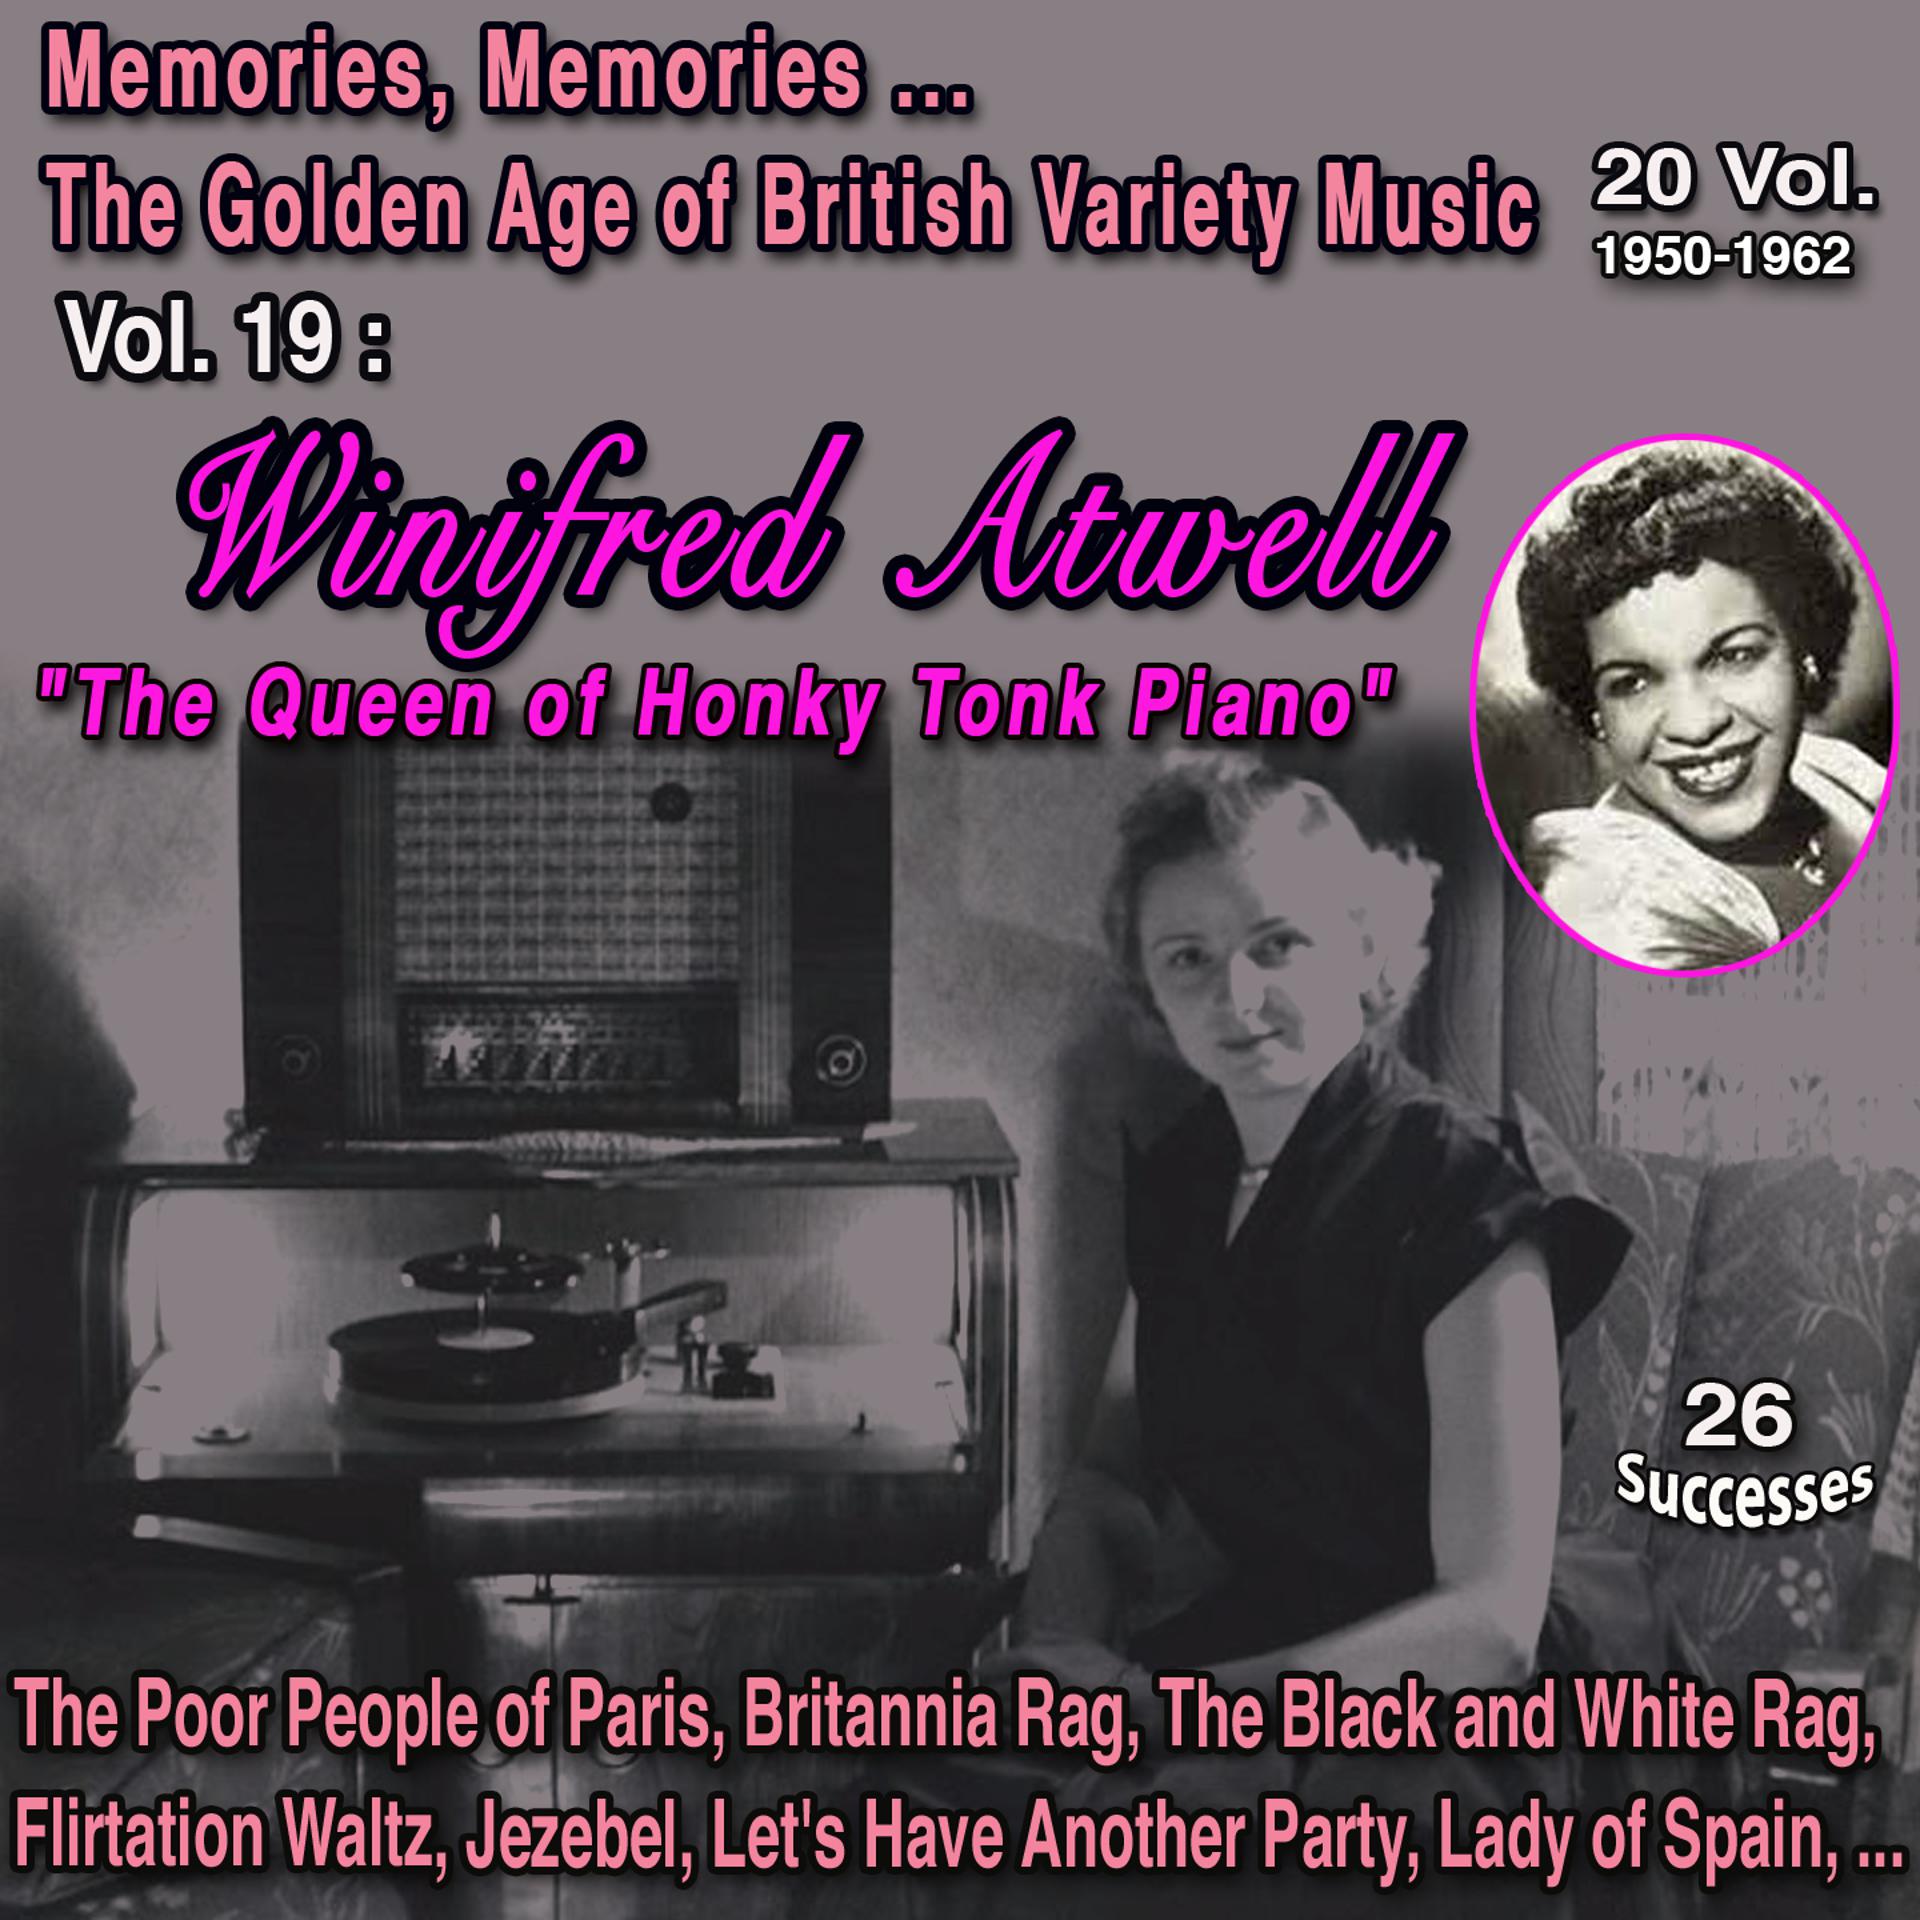 Постер альбома Memories, Memories... The Golden Age of British Variety Music 20 Vol. - 1950-1962 Vol. 19 : Winifred Atwell "The Queen of Honky Tonk Piano"